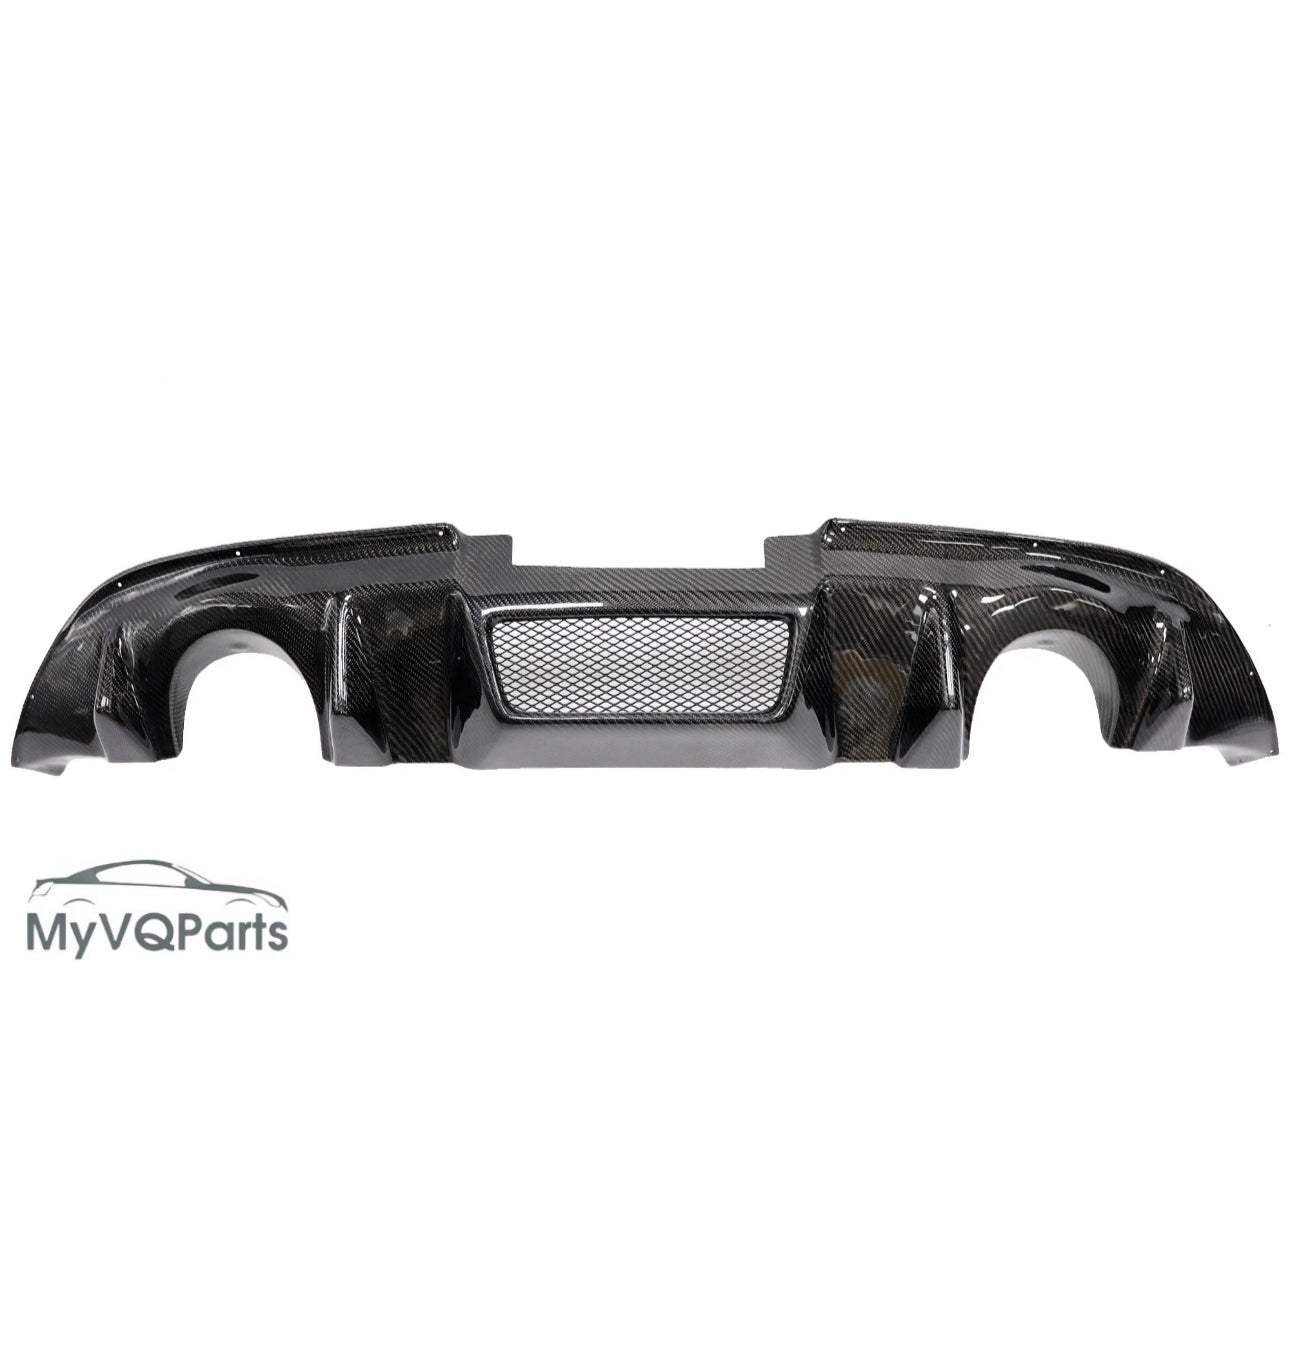 MyVQParts G37 Coupe V2 style rear diffuser